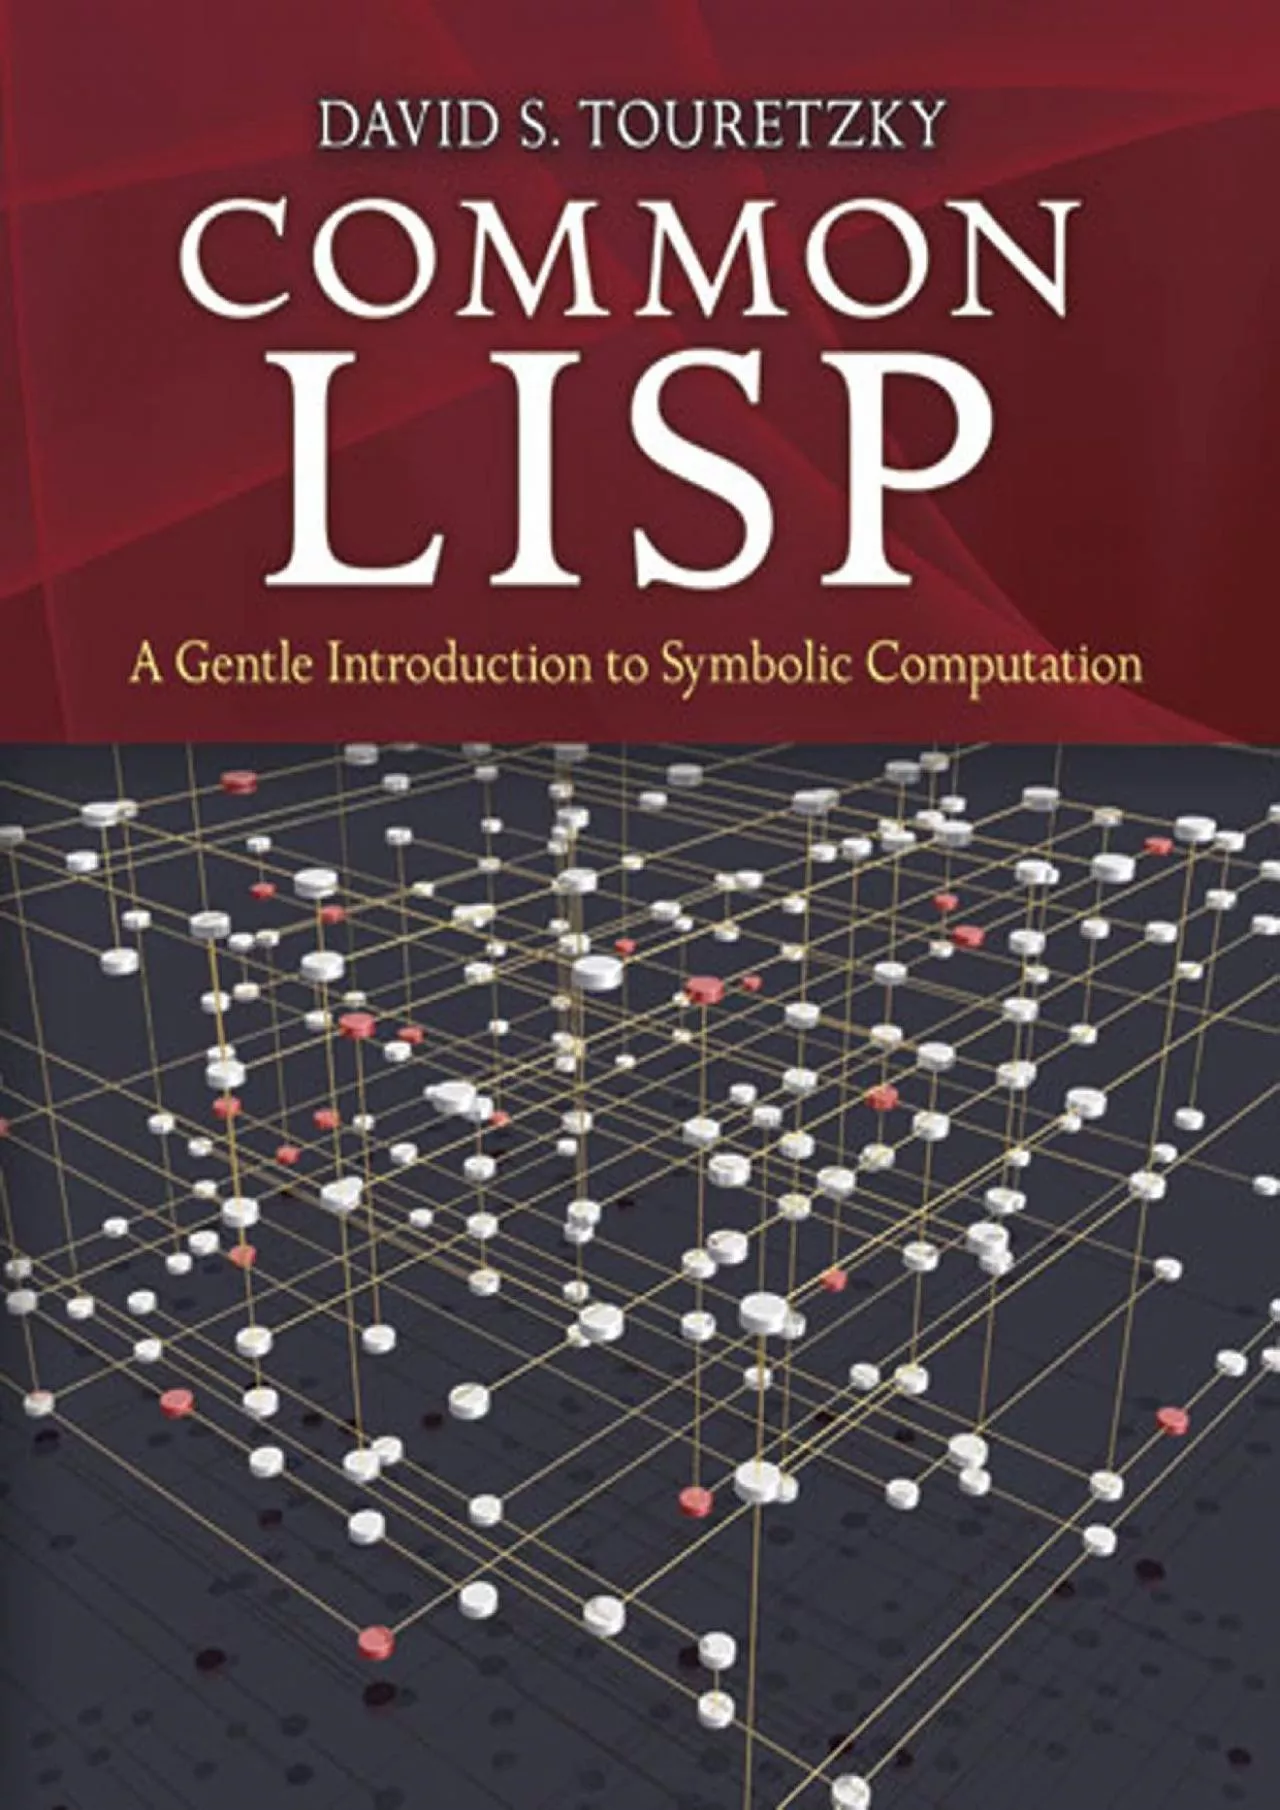 [PDF]-Common LISP: A Gentle Introduction to Symbolic Computation (Dover Books on Engineering)